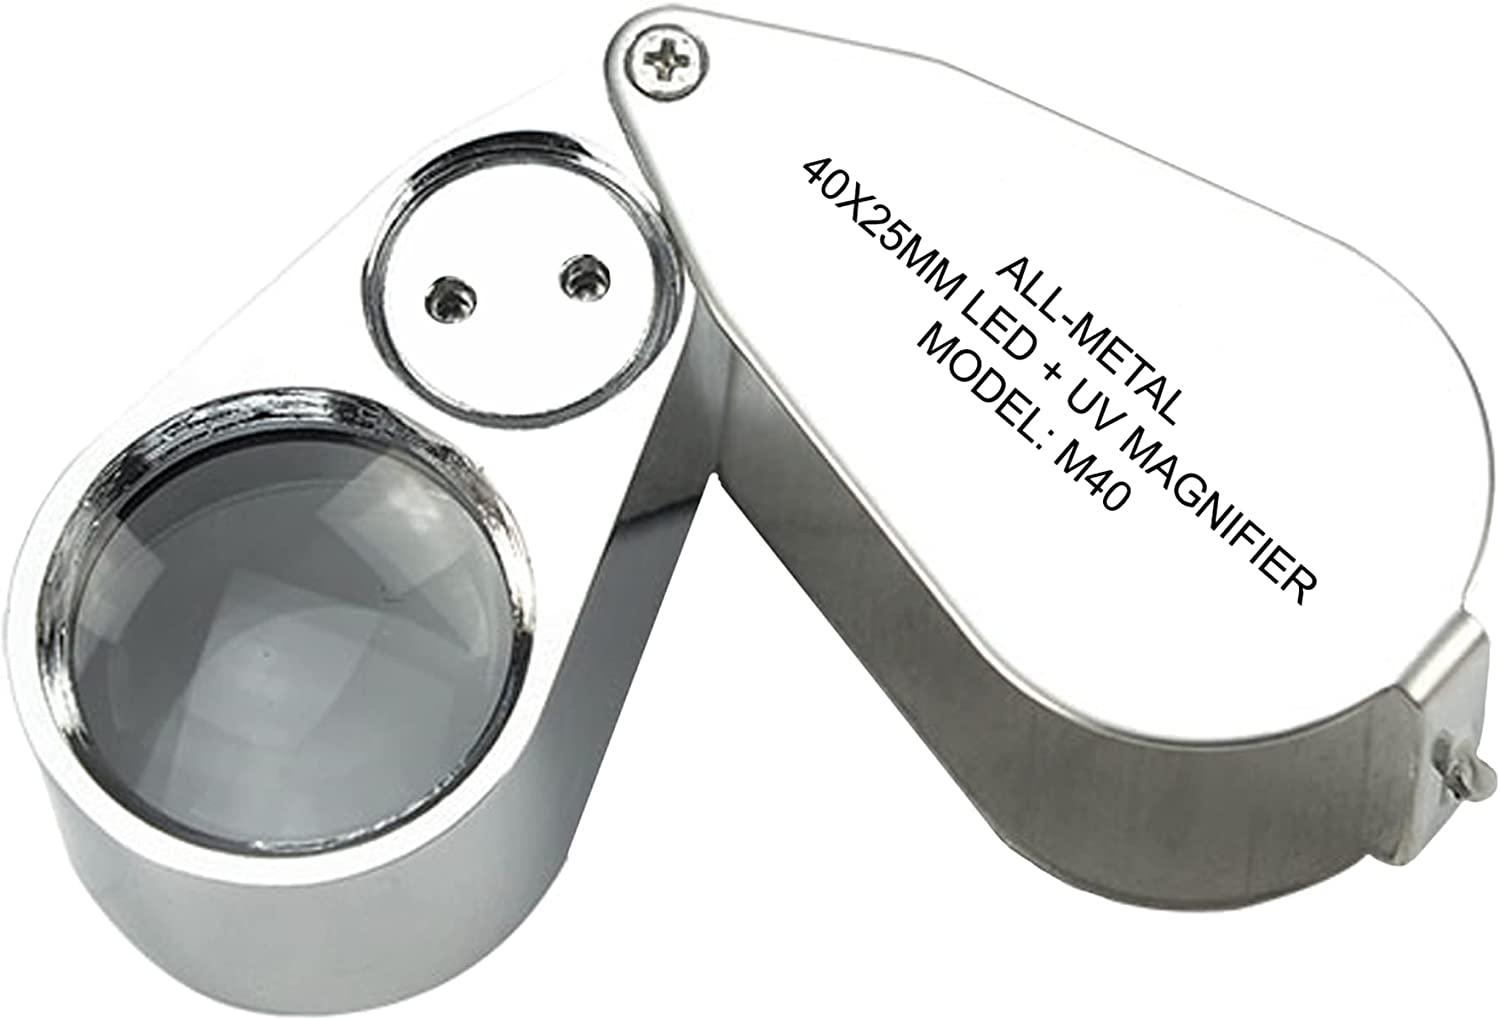 40X Jewelers Loupe Foldable Magnifier with LED Light Portable Folding Magnifying  Glass Illuminated Magnifier Coin Jewelry